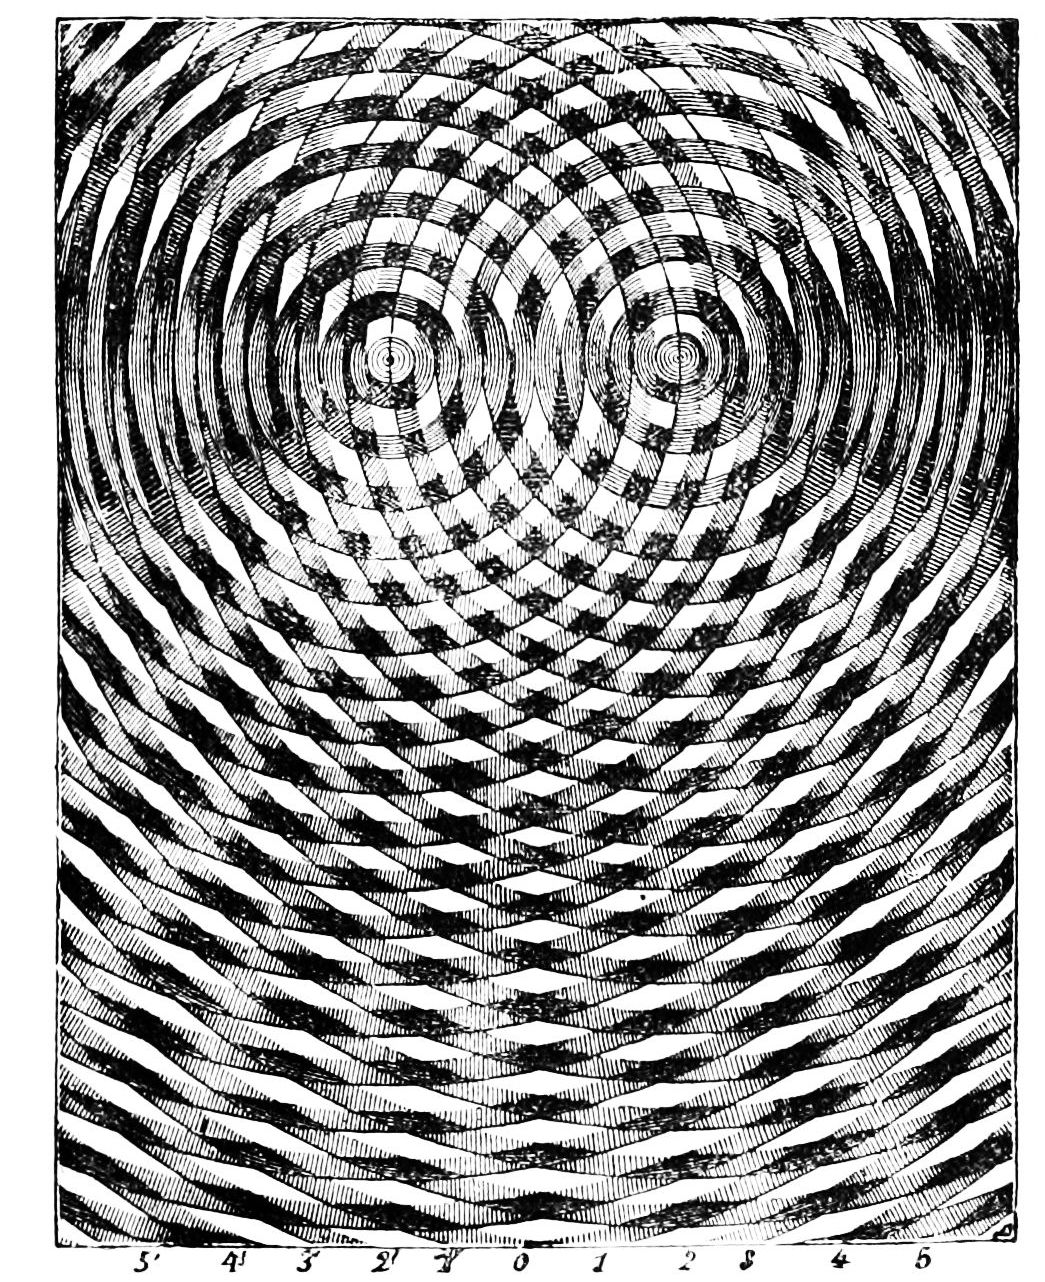 Nom : Hyperbolas_produced_by_interference_of_waves.jpg
Affichages : 204
Taille : 485,9 Ko